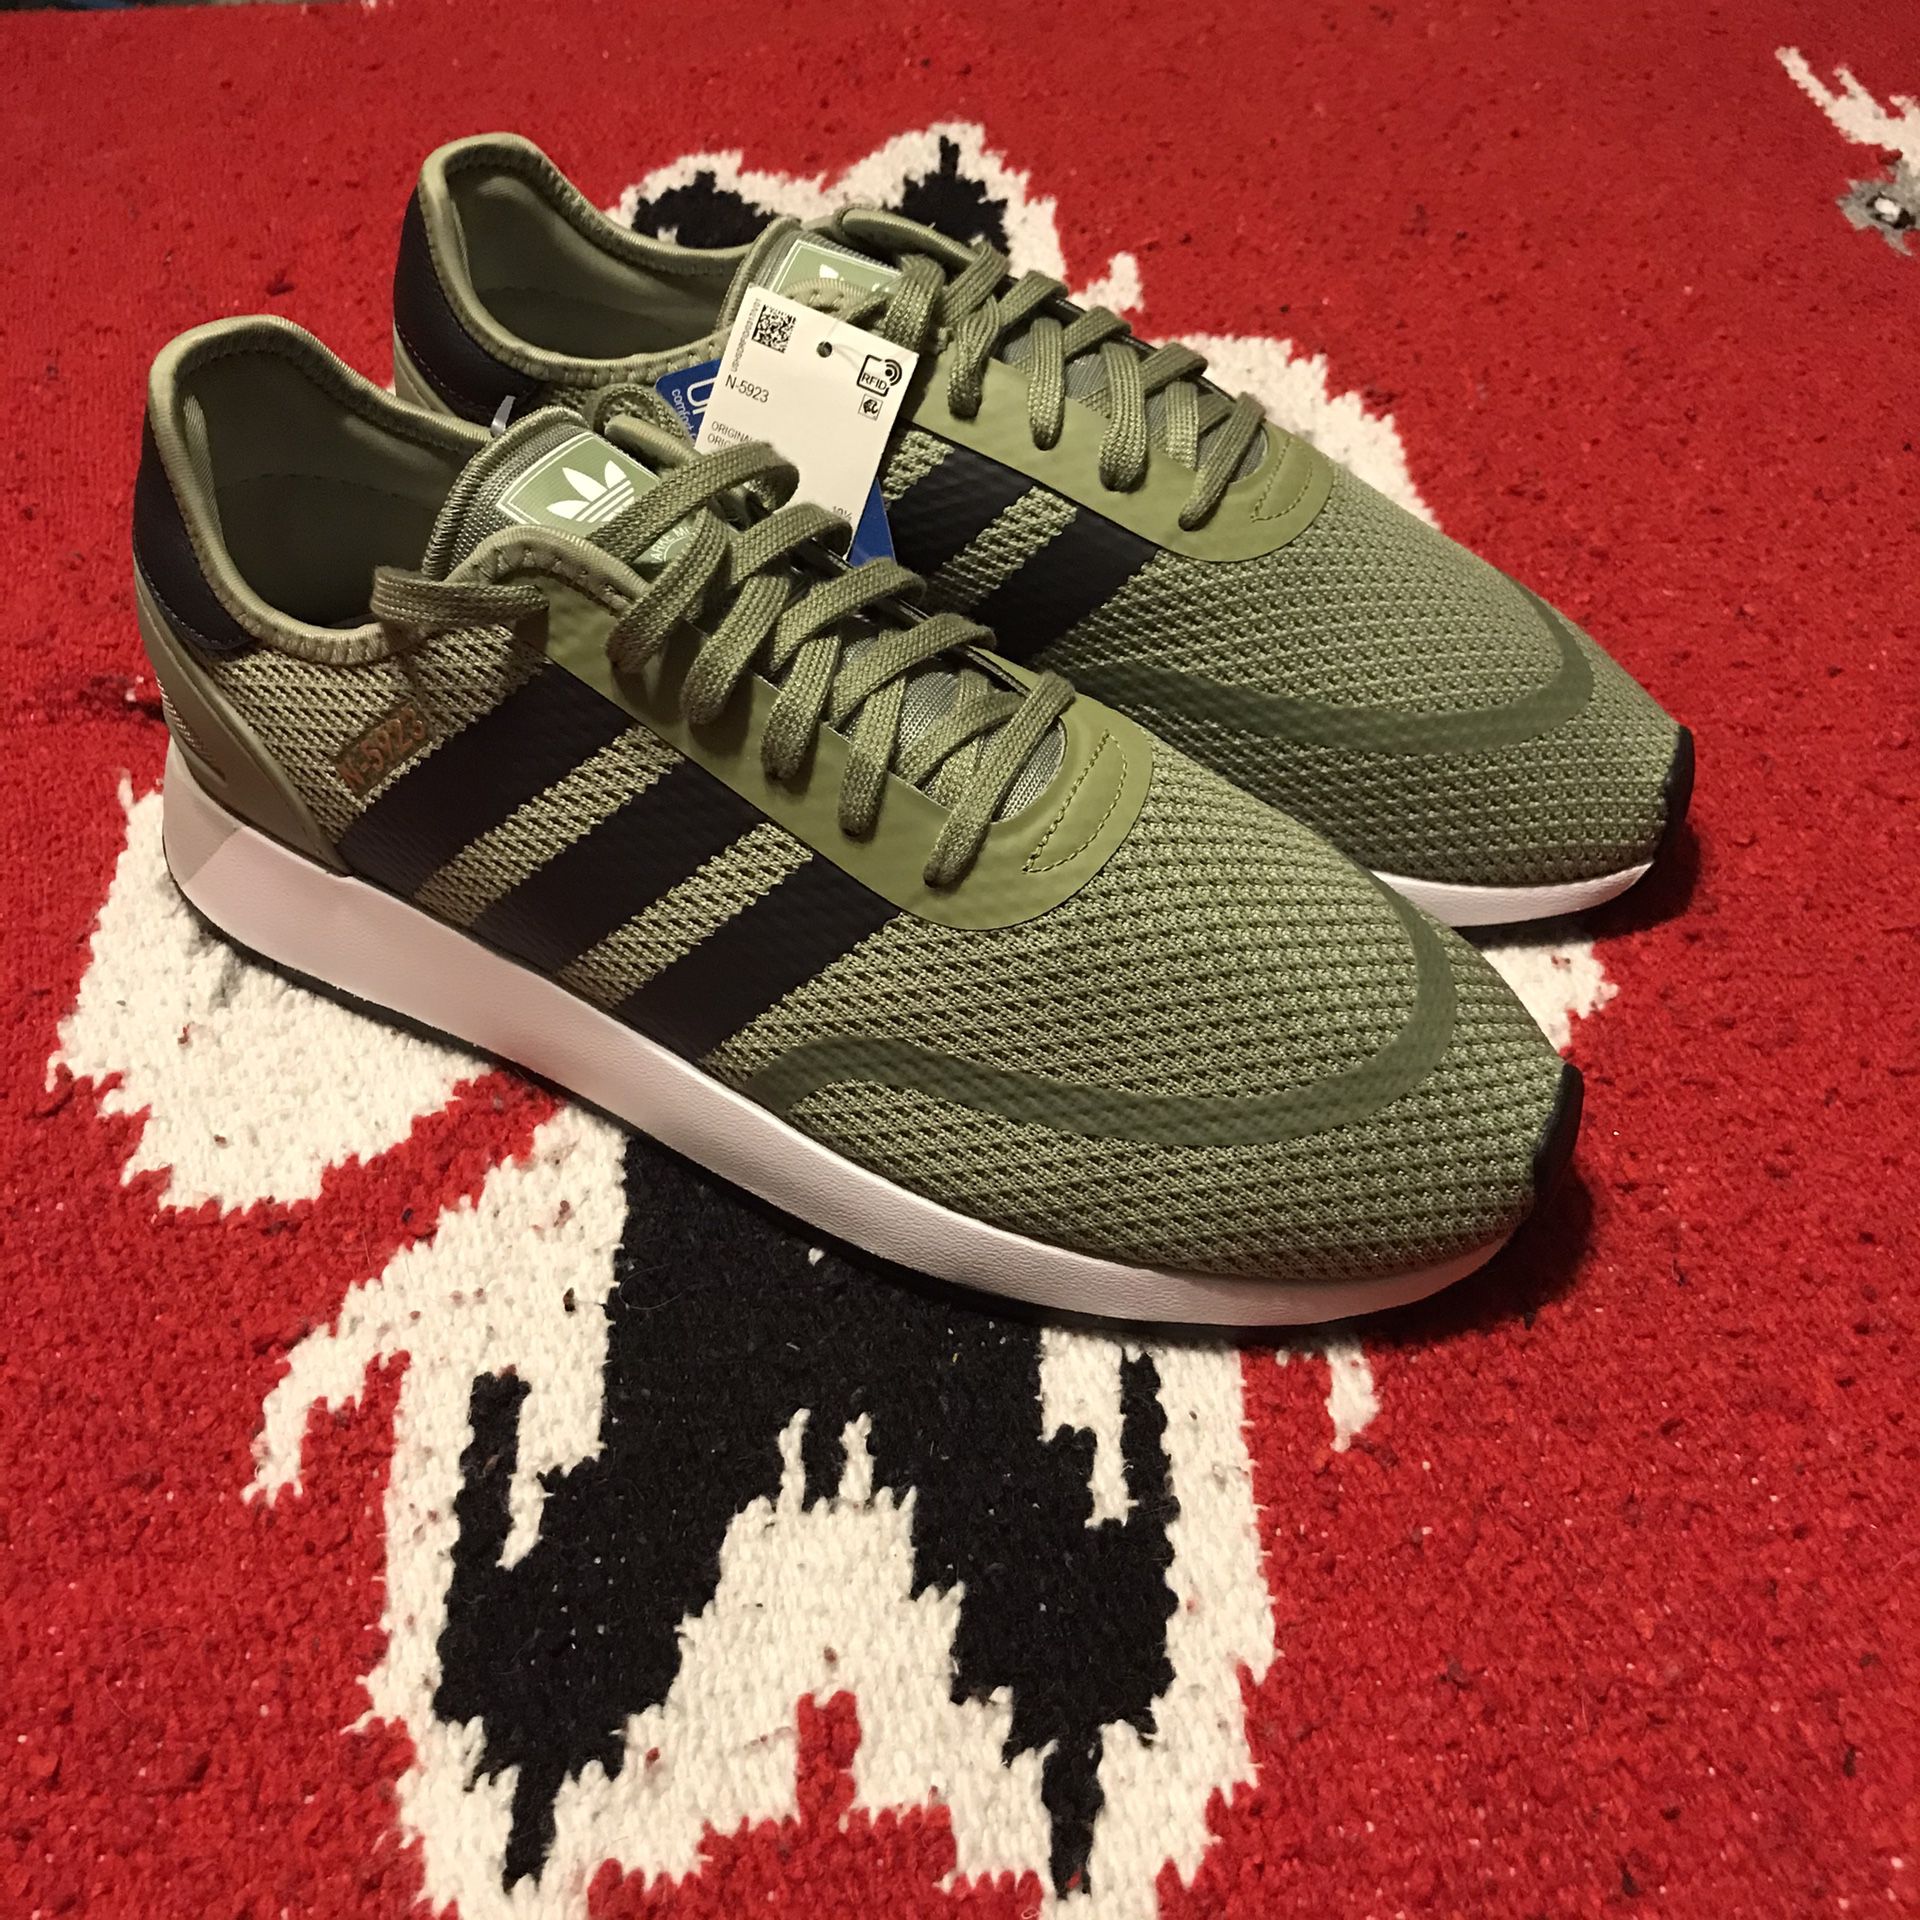 NWT ADIDAS N-5923 SNEAKERS SHOES IN GREEN MESH MENS SIZE 11